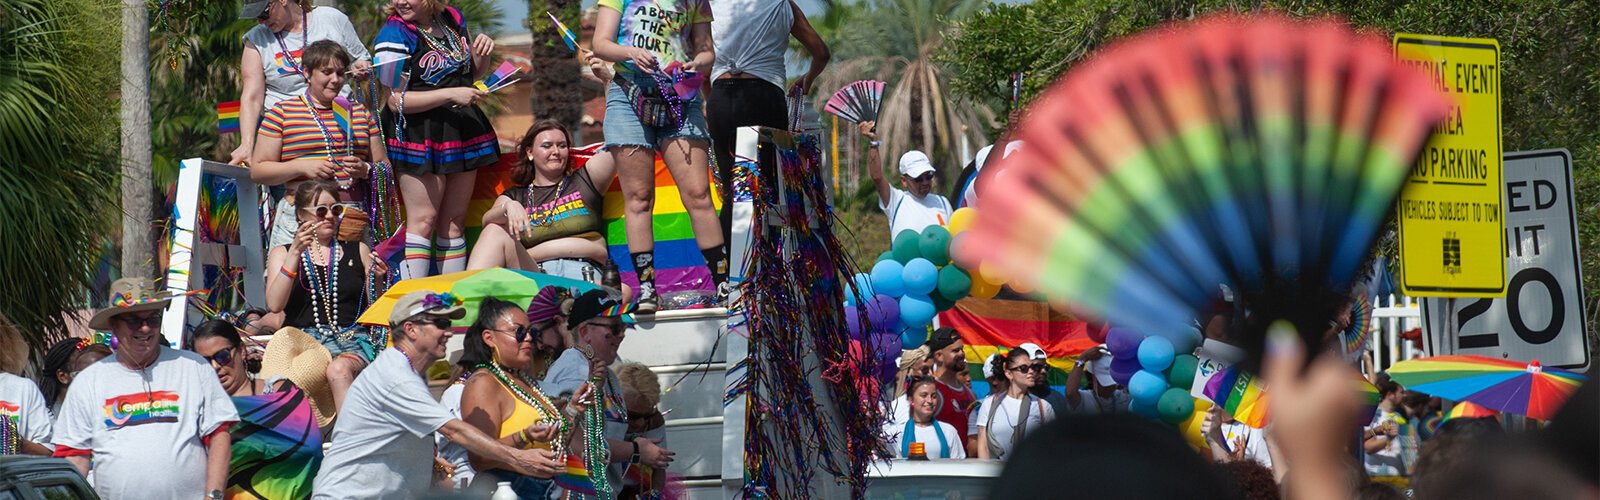 The crowd gathers for a chance at beads and other items tossed from floats at this year's St Pete Pride Parade.